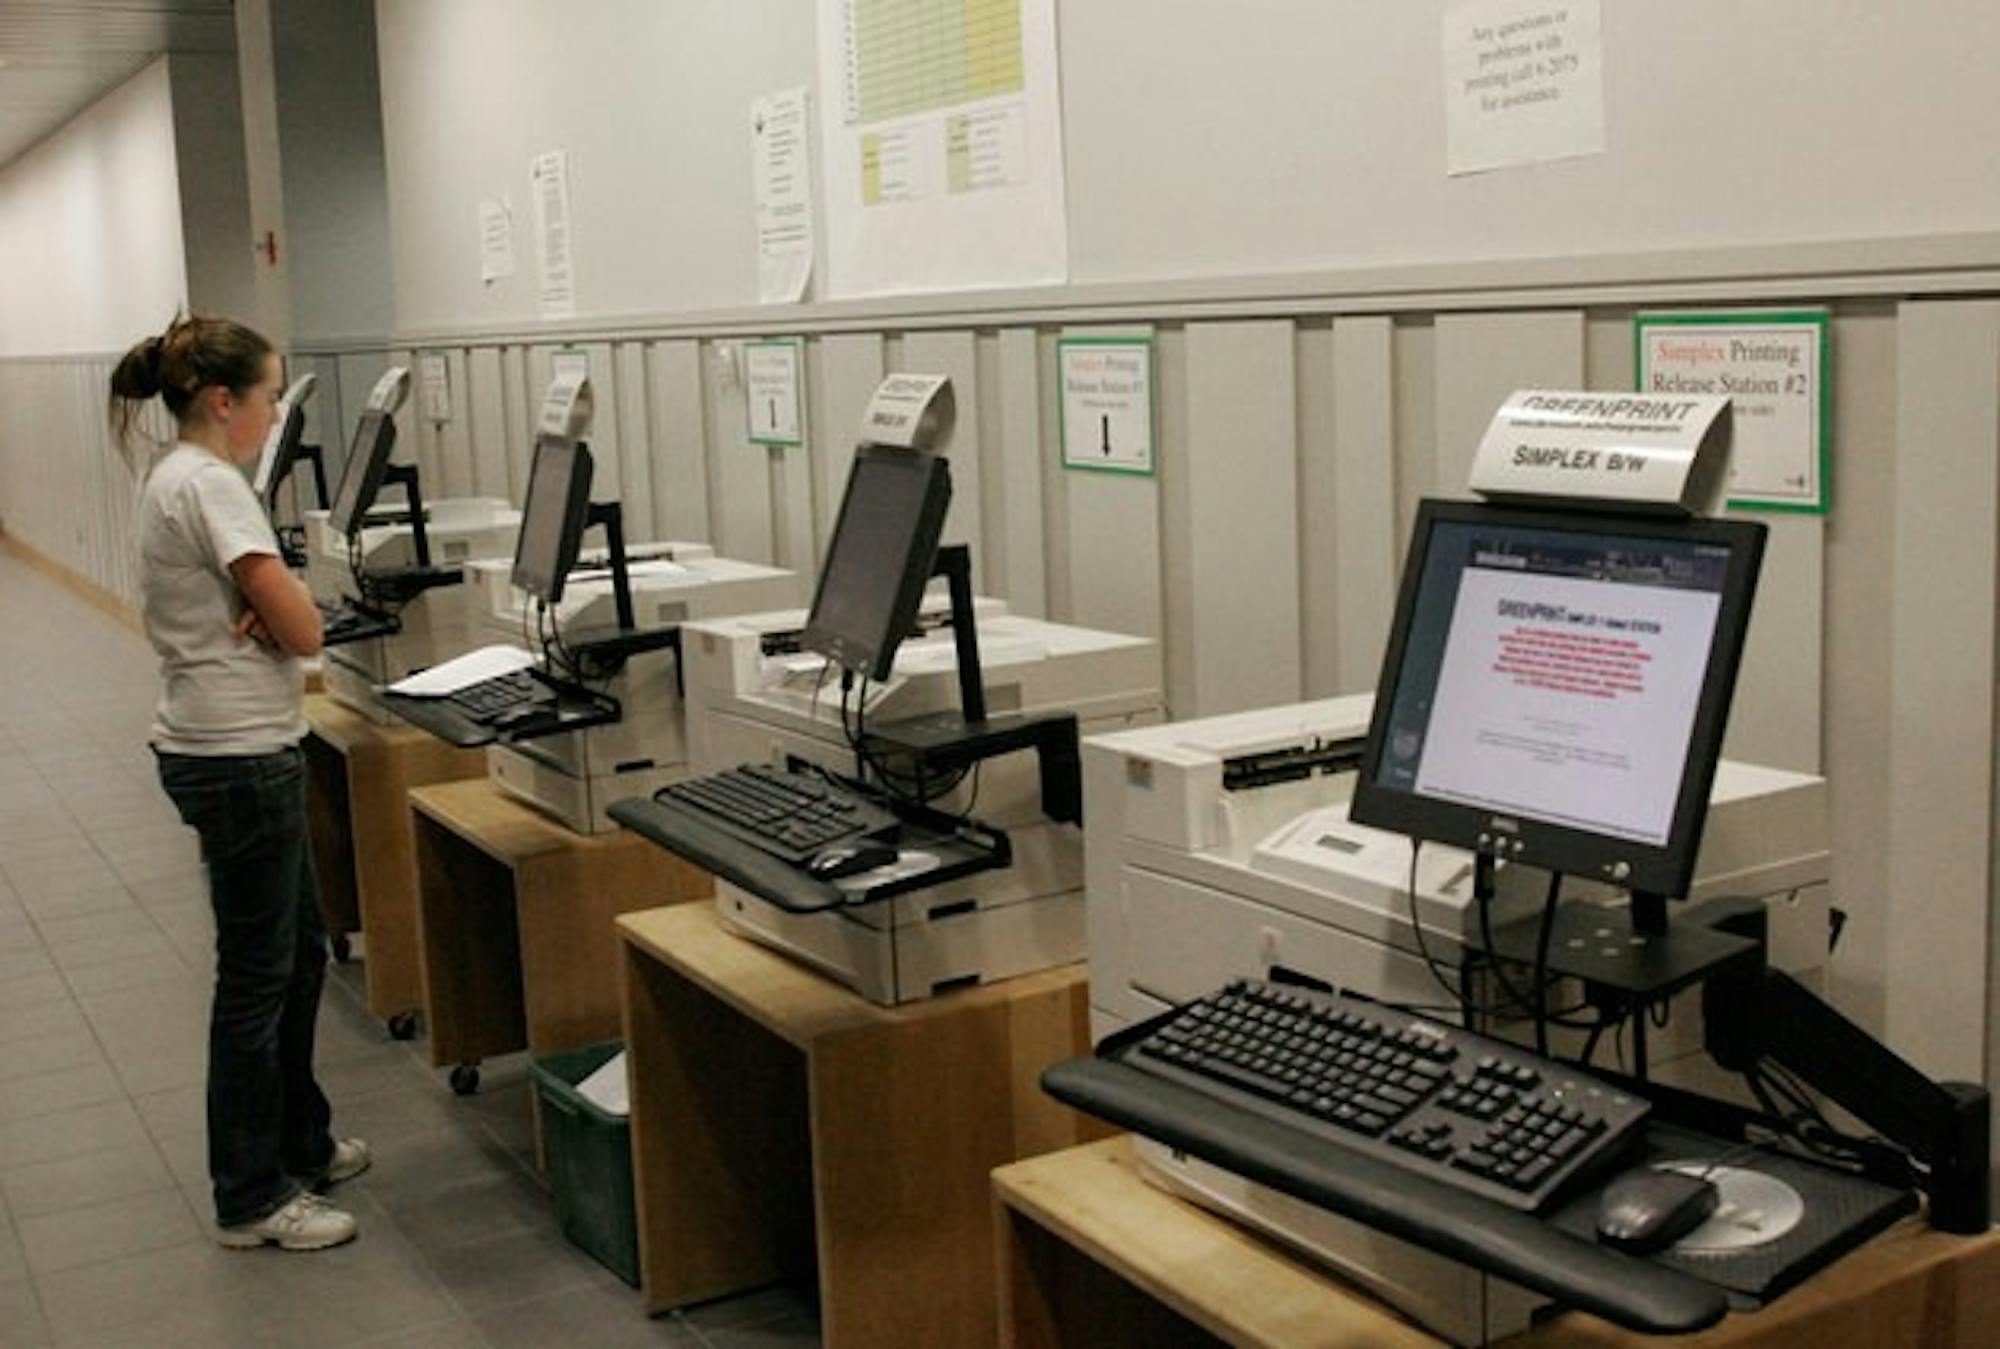 Students who upgrade their computers to Mac OS X Leopard, the latest upgrade, are presently unable to use GreenPrint or eTokens.